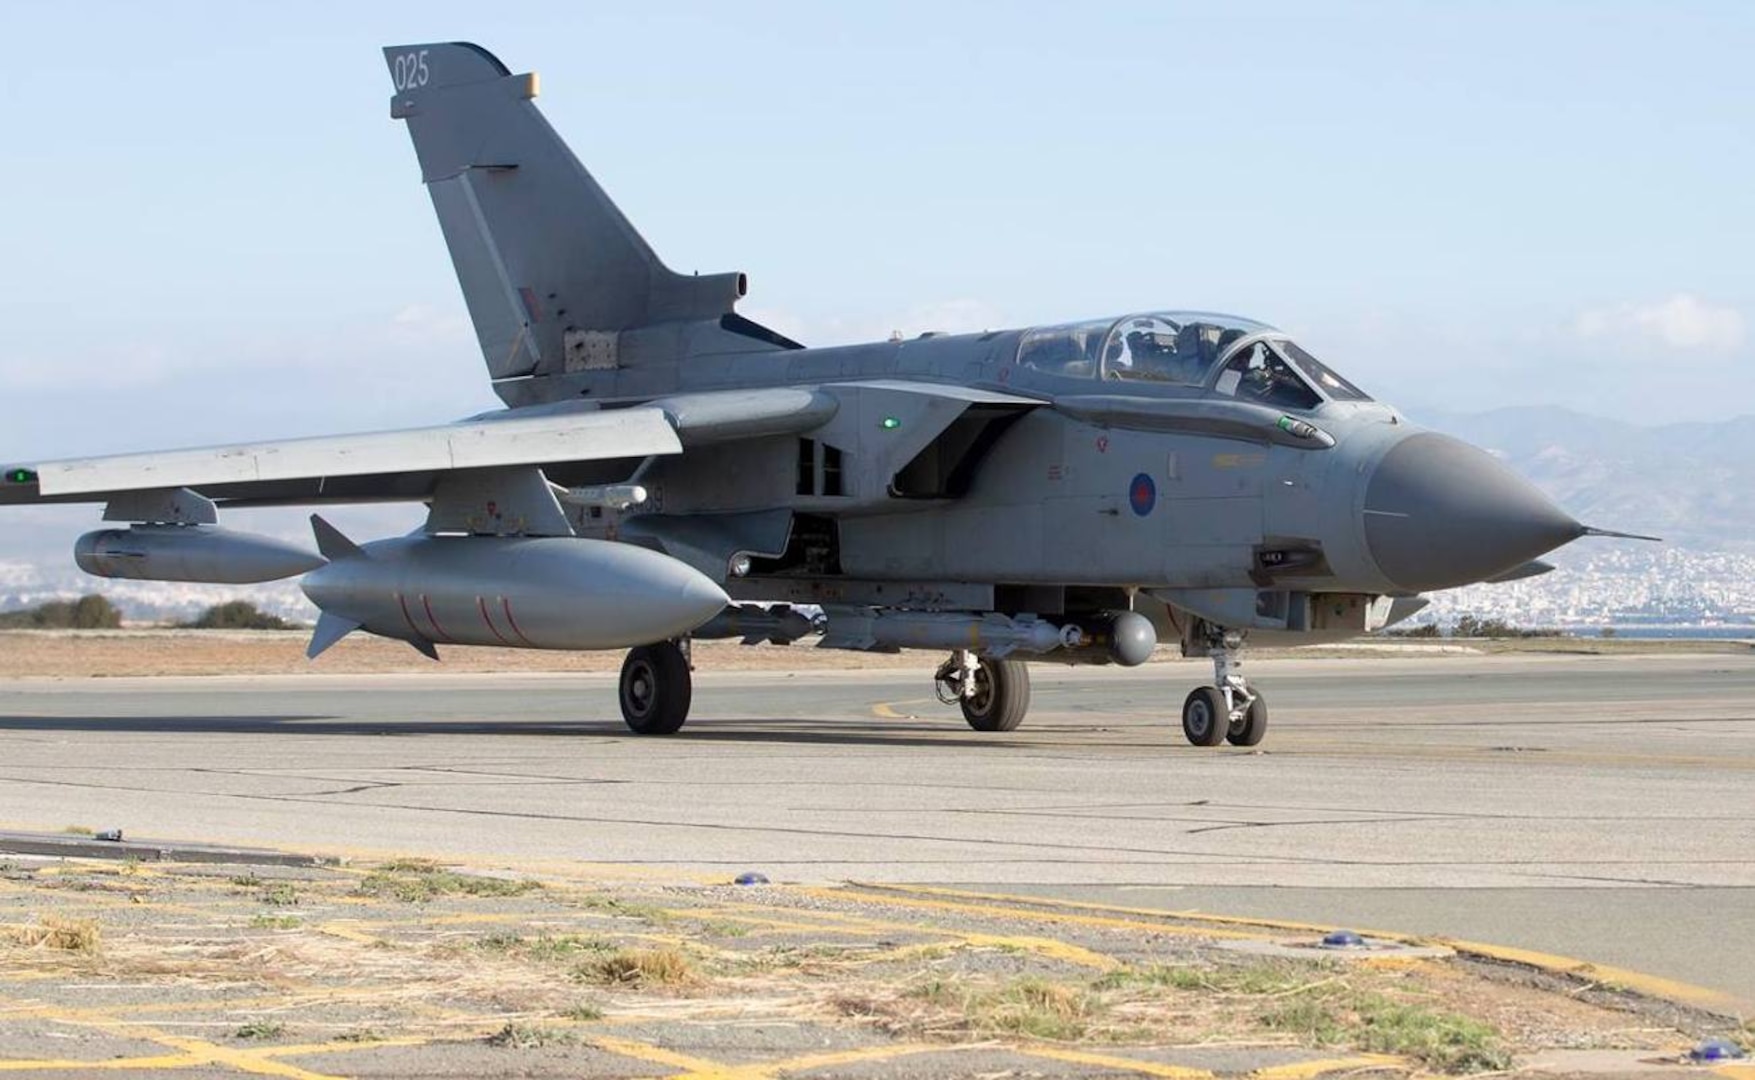 Royal Air Force Tornado GR4s return to RAF Akrotiri after their first mission, since the parliamentary vote to undertake air strikes in Syria. (RAF Photo)